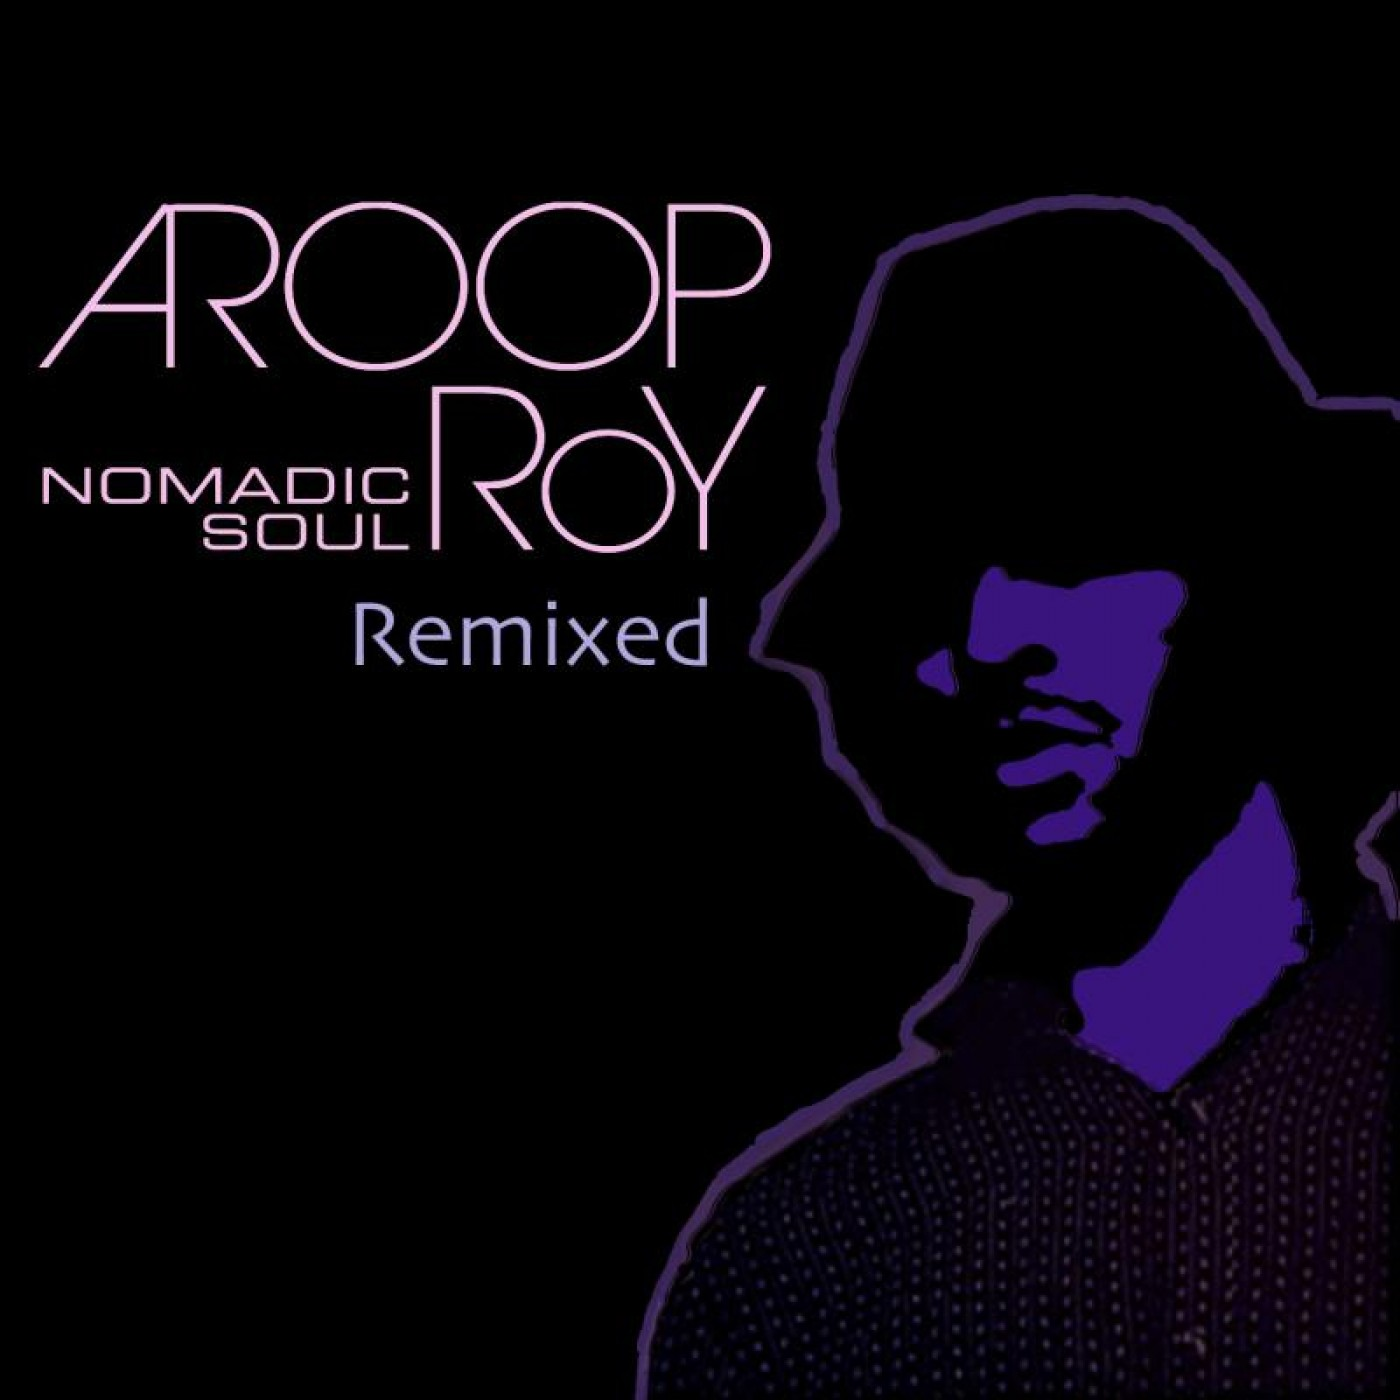 Aroop Roy - The Lonely Years (Simbad remix) [feat. Sacha Williamson]